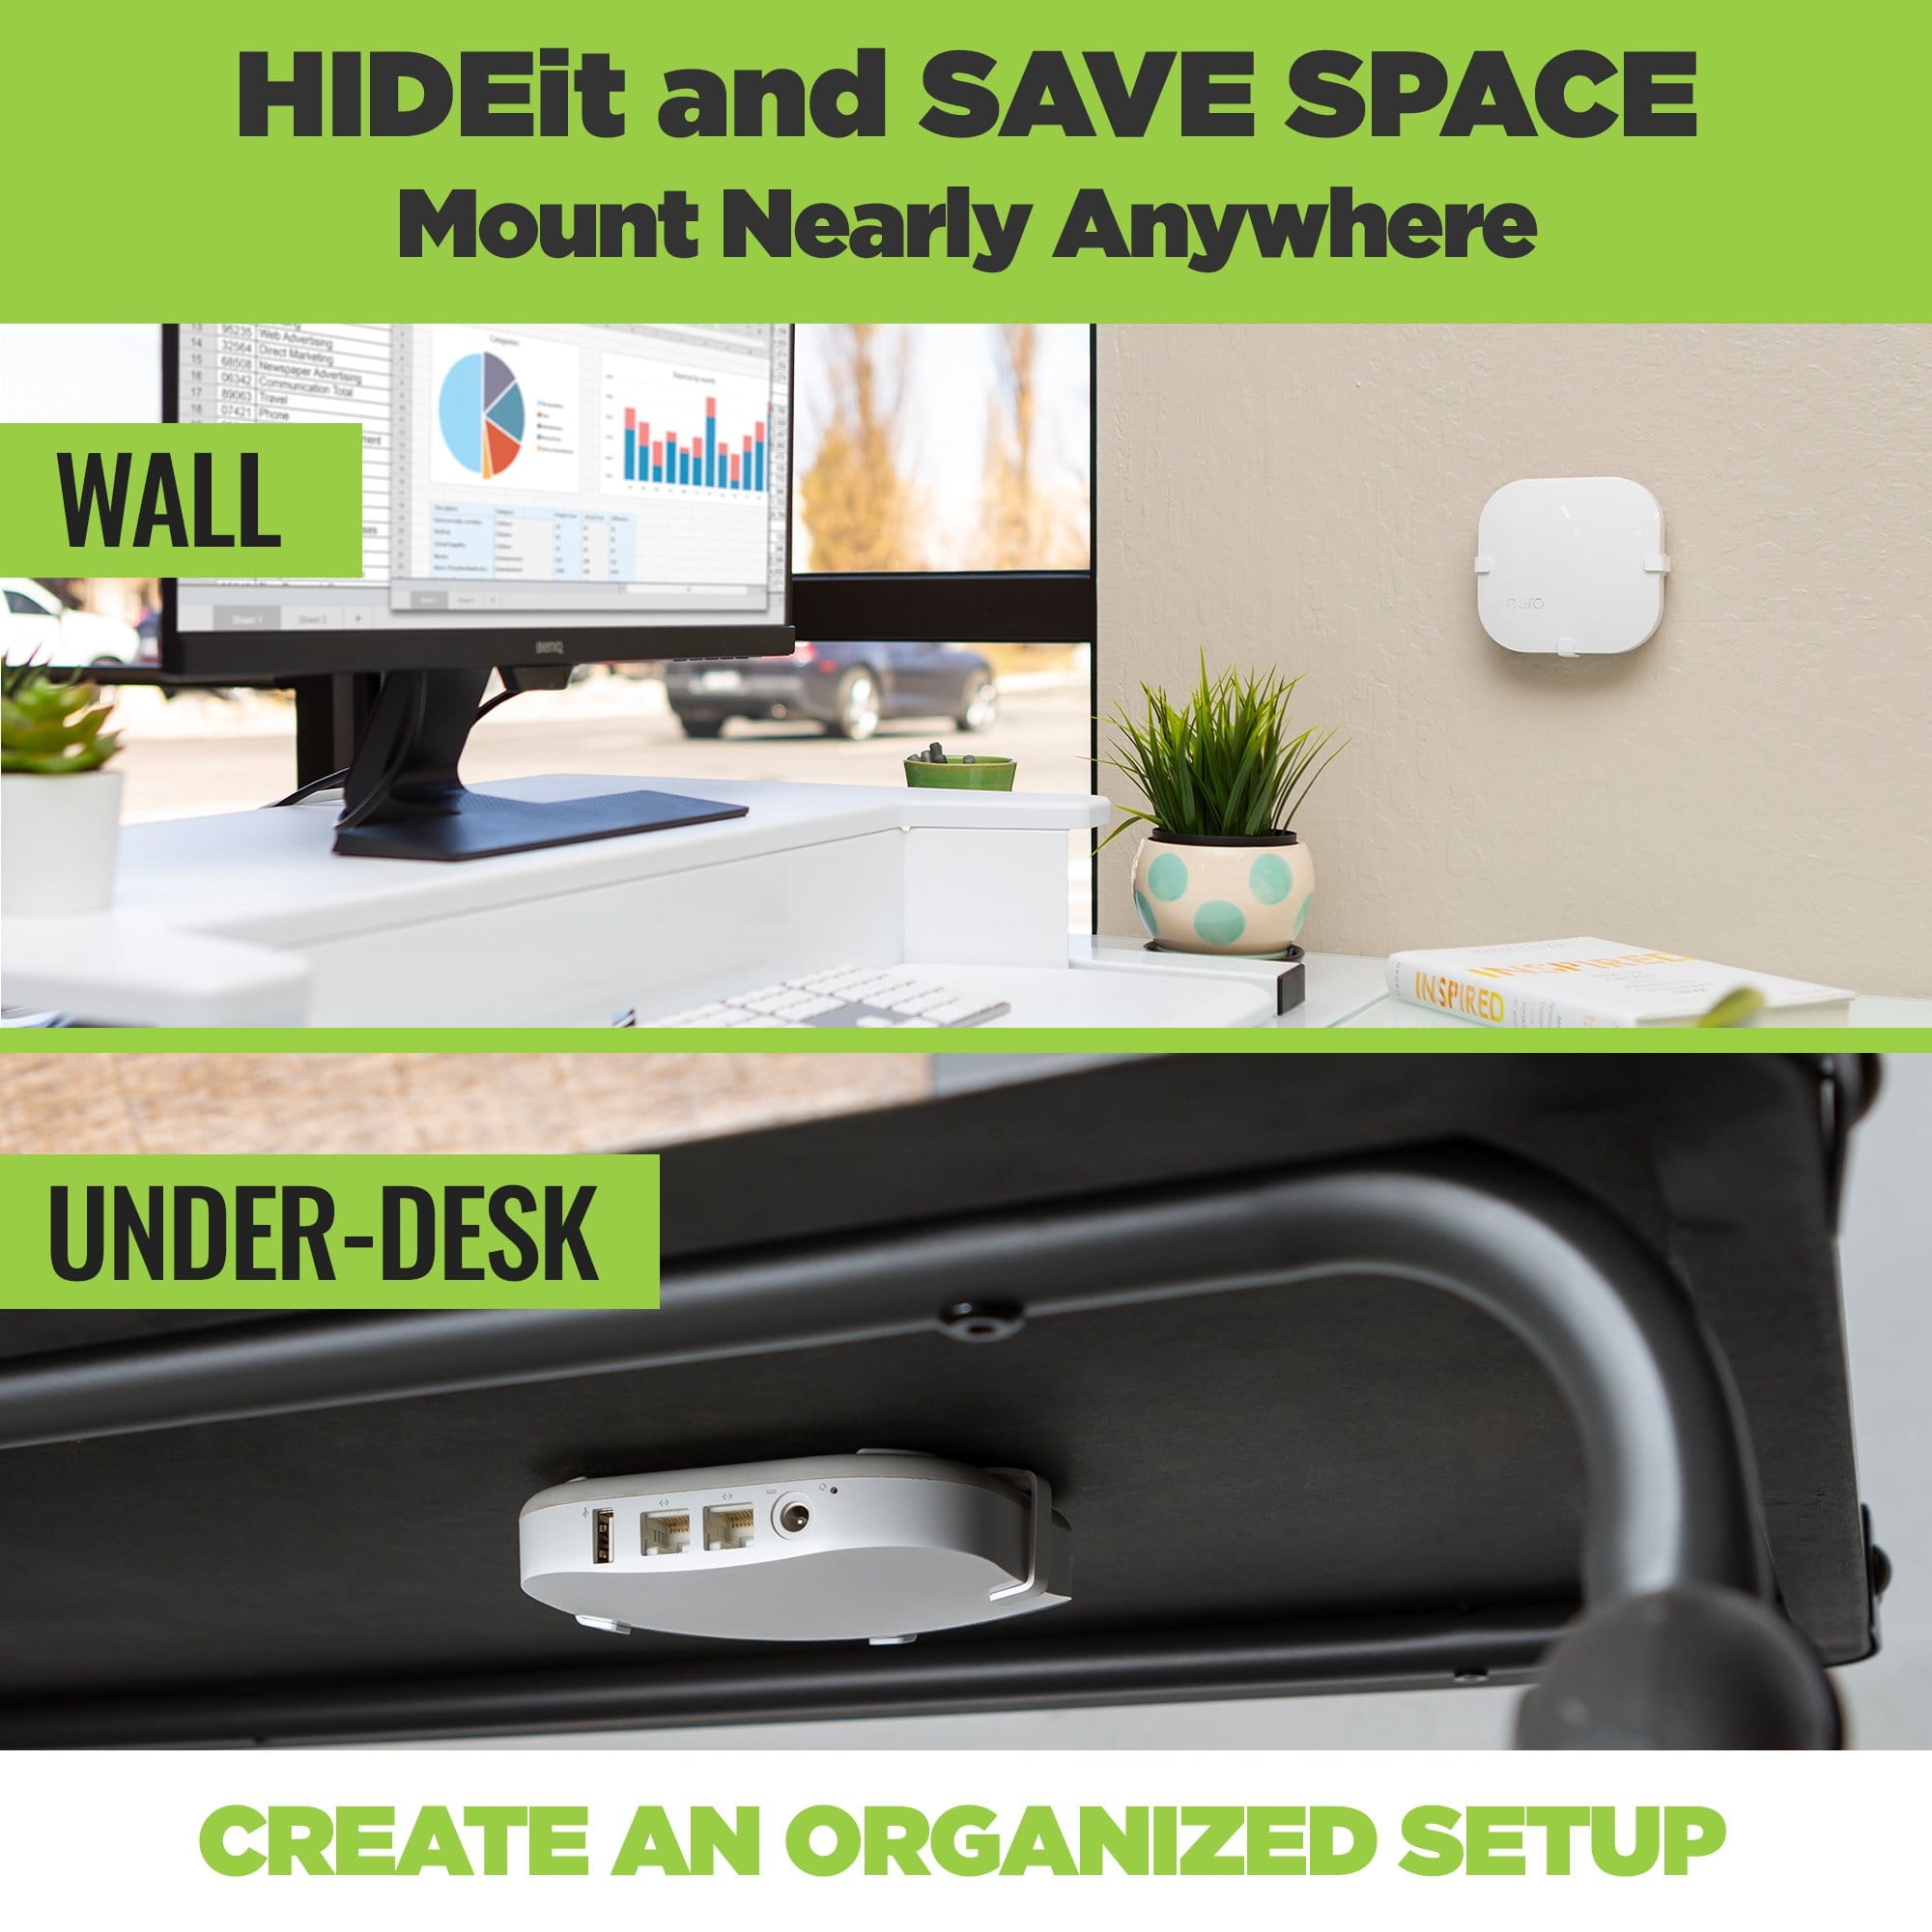 The HIDEit Eero Pro Mount can be wall mounted or under-desk mounted to create an organized setup.